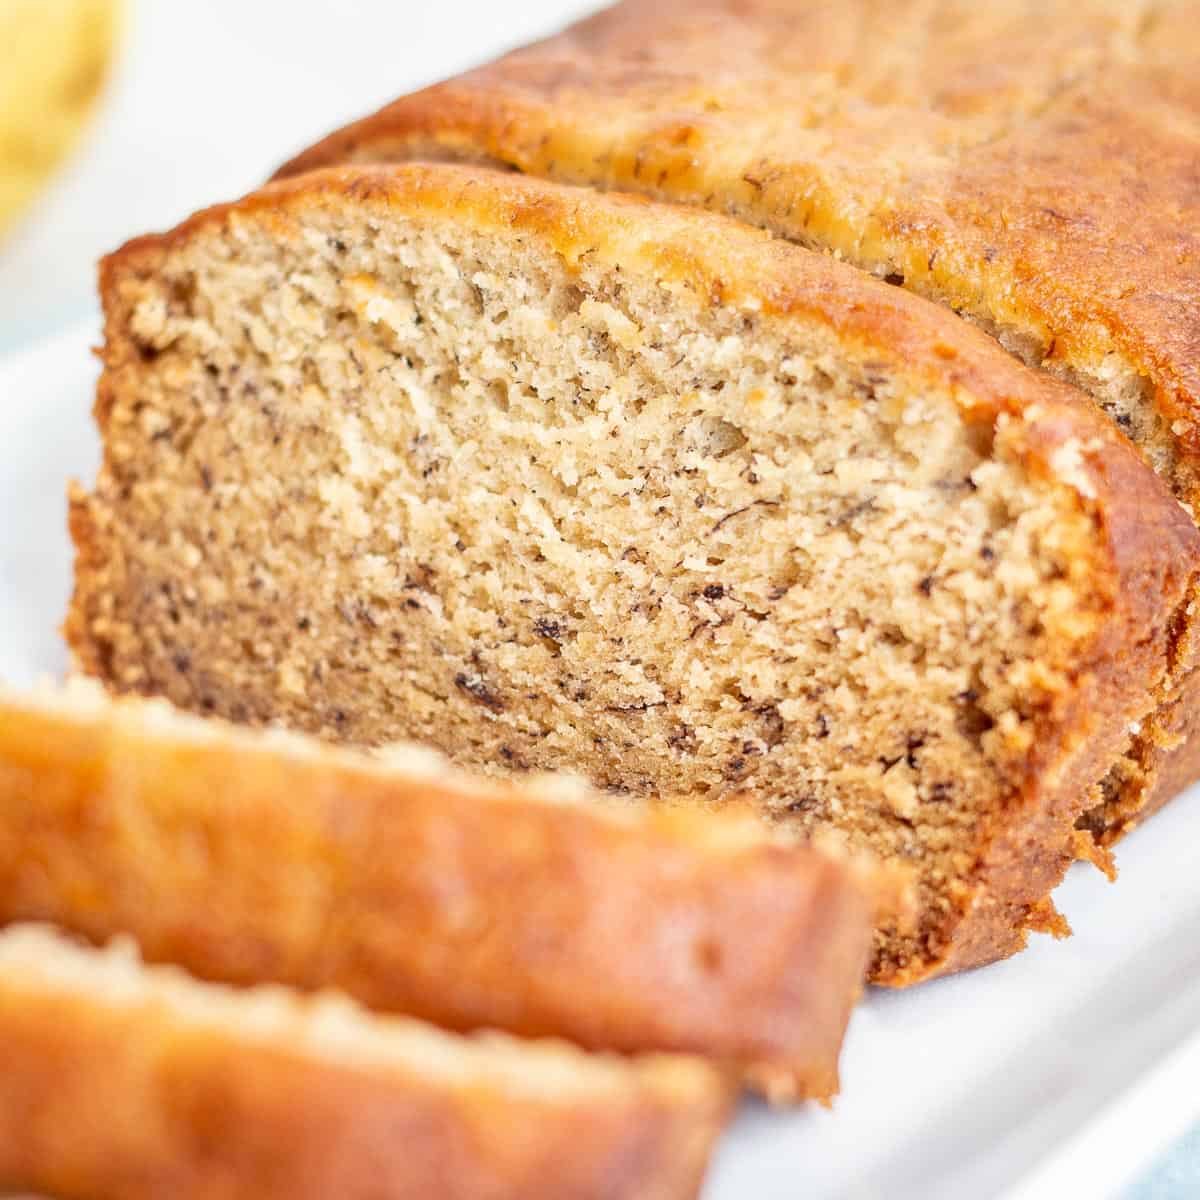 Old Fashioned Banana Bread loaf with slice shown.